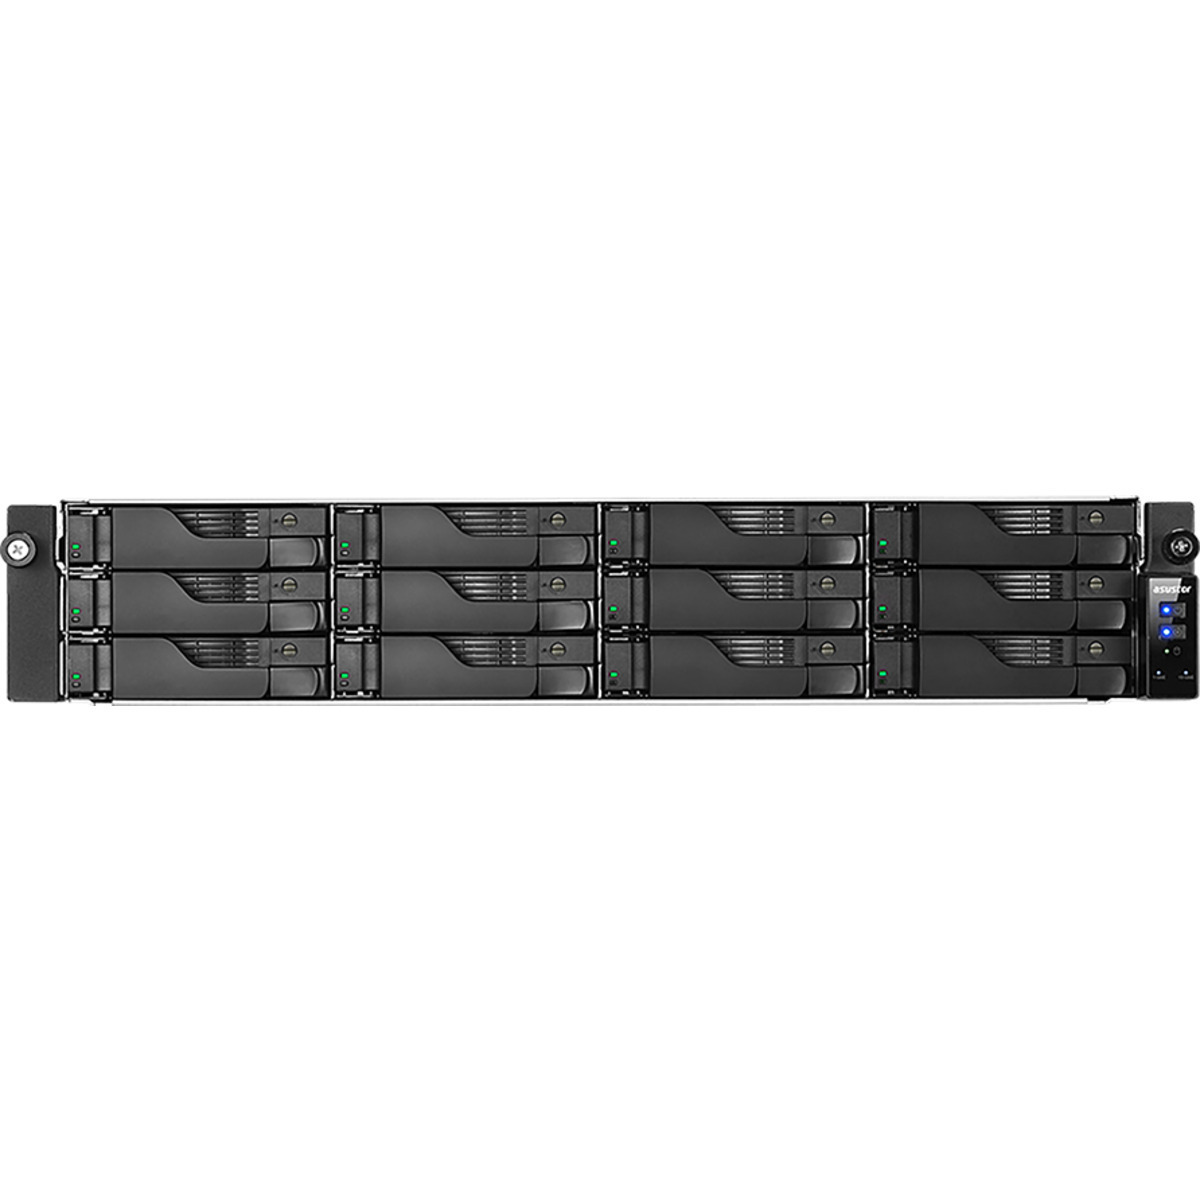 ASUSTOR LOCKERSTOR 12RD AS6512RD 168tb 12-Bay RackMount Multimedia / Power User / Business NAS - Network Attached Storage Device 12x14tb Seagate IronWolf Pro ST14000NT001 3.5 7200rpm SATA 6Gb/s HDD NAS Class Drives Installed - Burn-In Tested - FREE RAM UPGRADE LOCKERSTOR 12RD AS6512RD